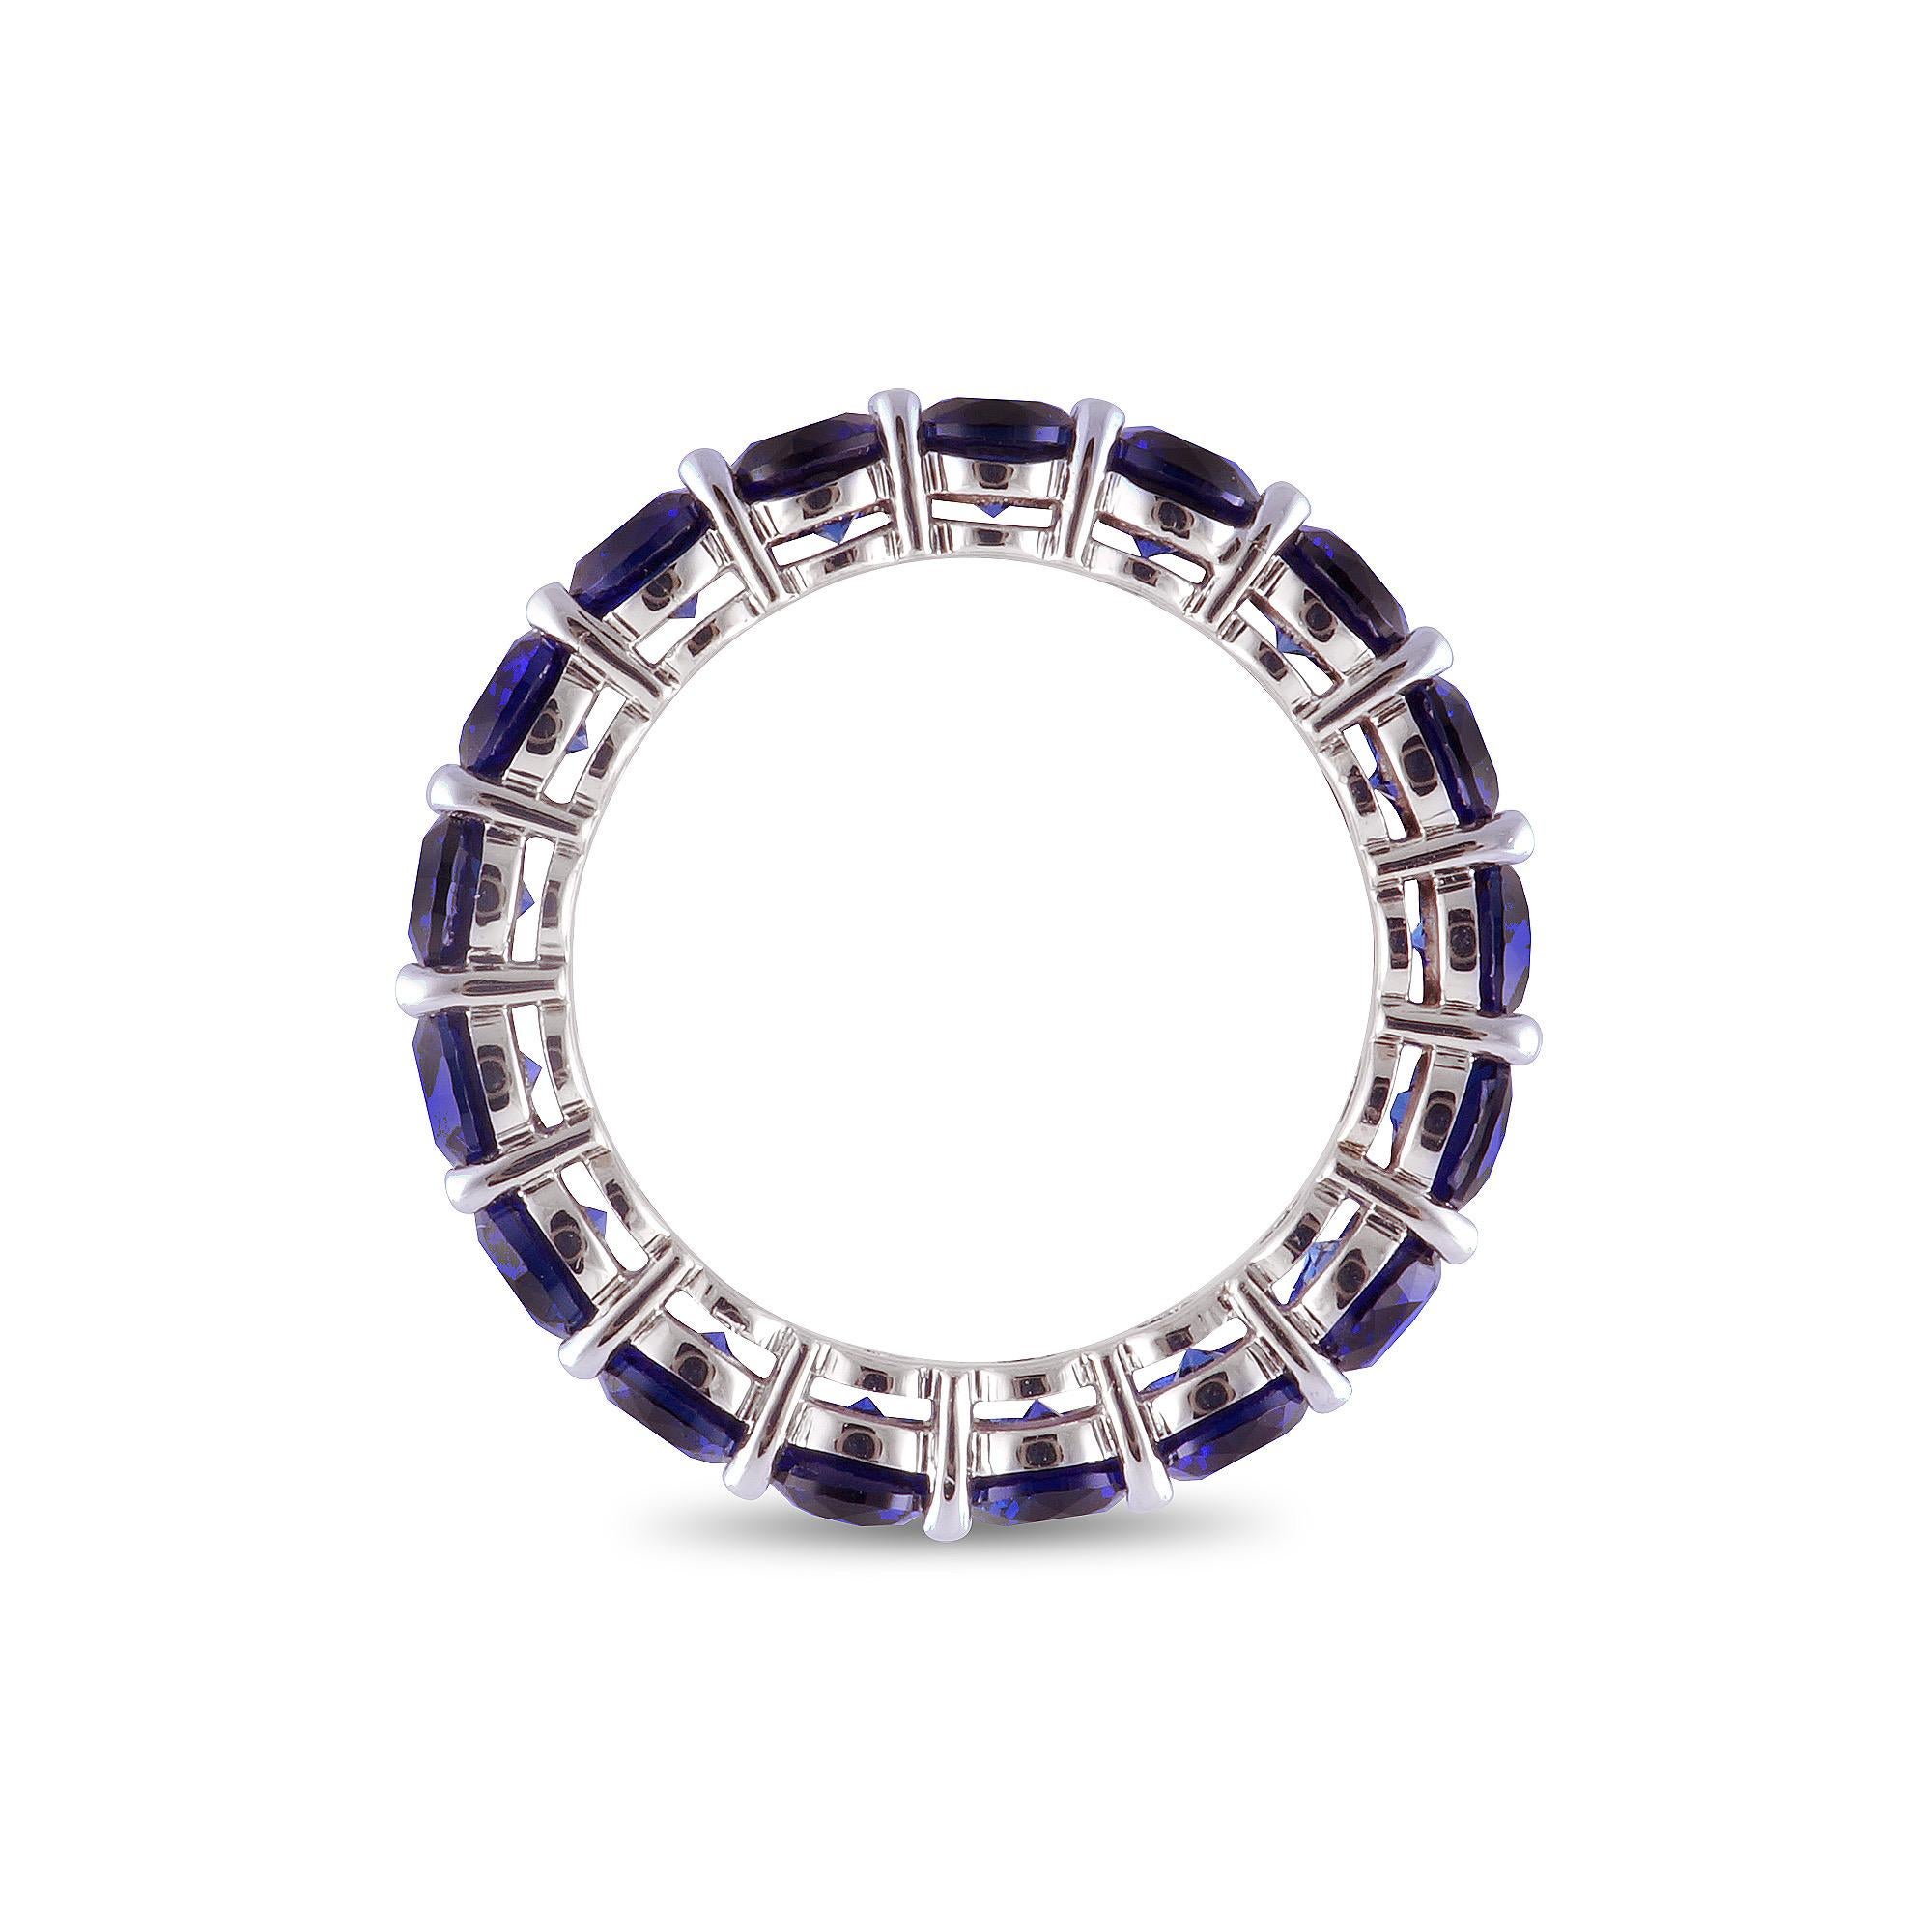 Ravishing 5.60 carat Sapphire eternity band with shared prongs. Perfect to compliment any ring stack and give it a pop of color. Ideal gift to give to your significant other as a push present or as an anniversary band, since the unbroken circle